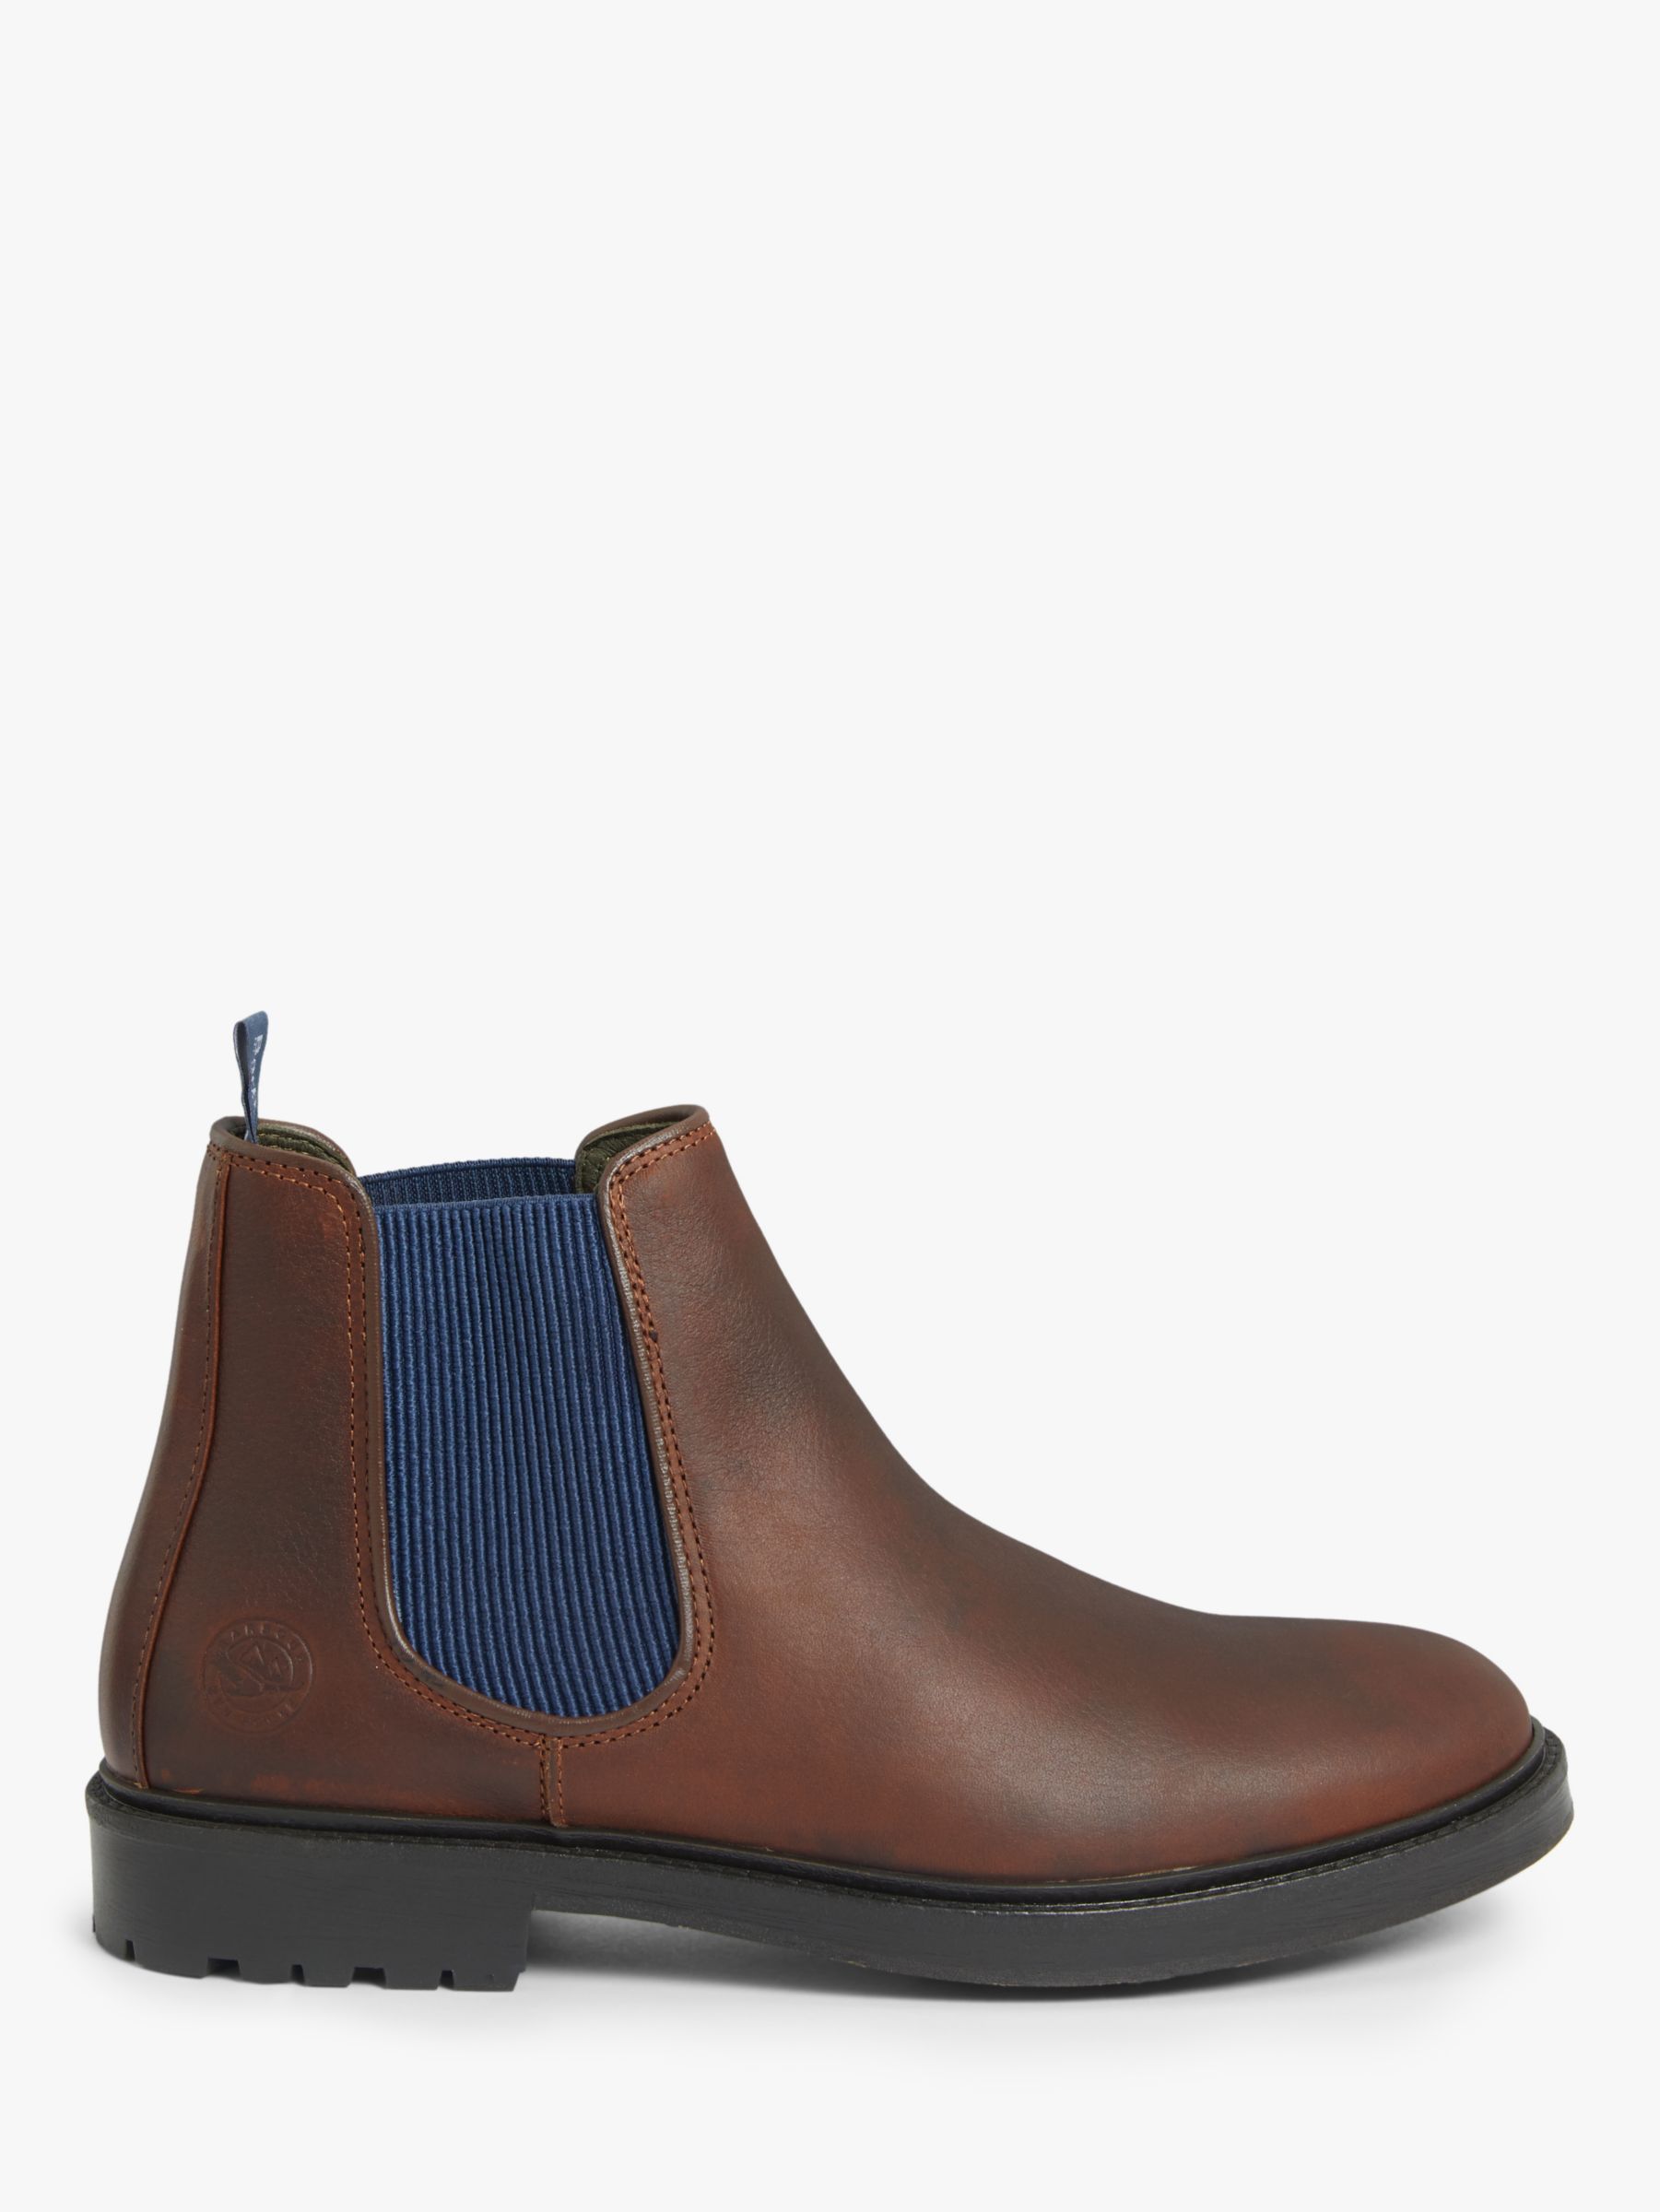 Barbour Graftham Chelsea Boots, Tan at 